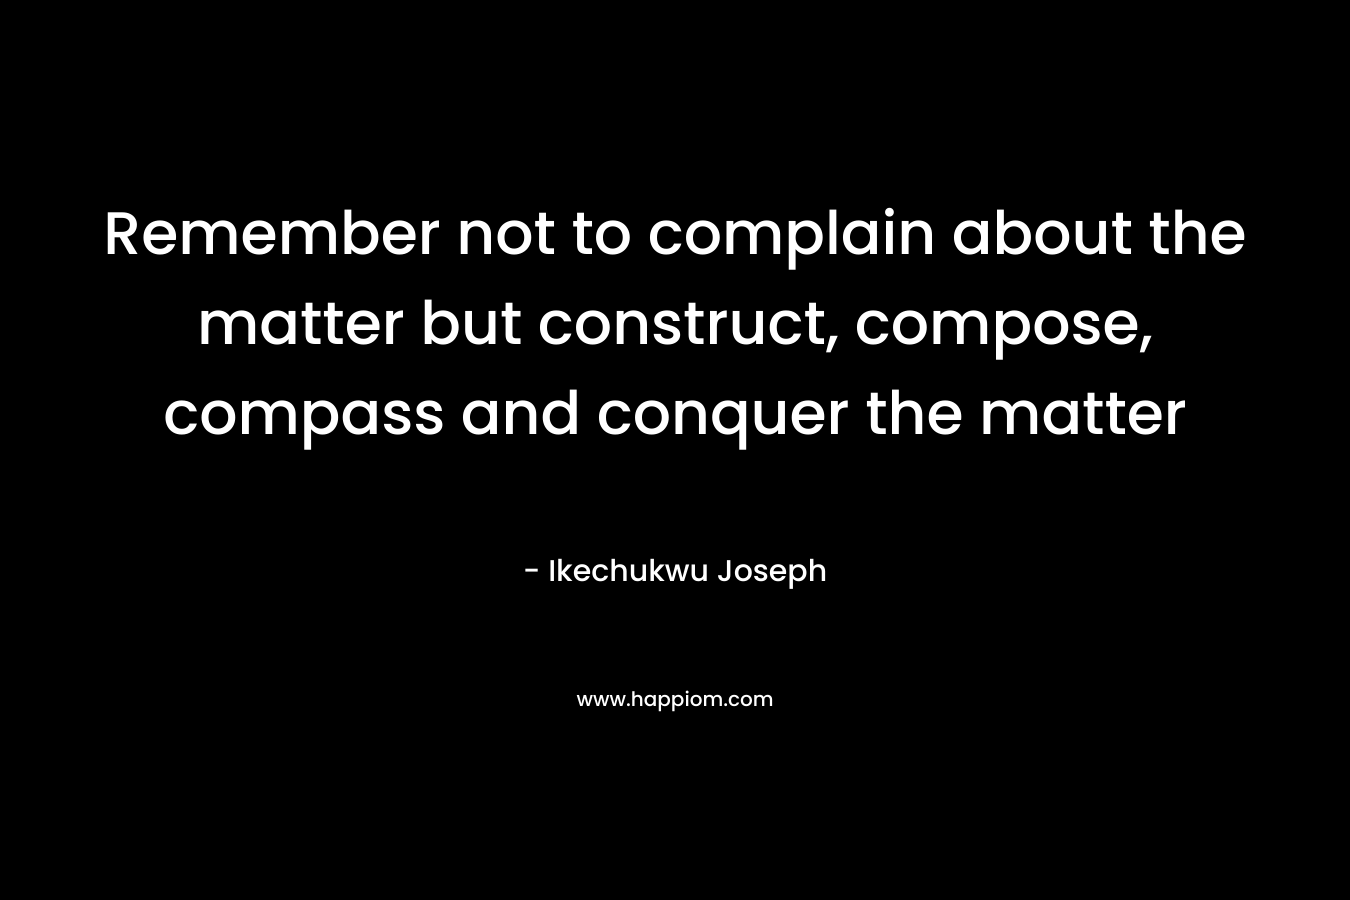 Remember not to complain about the matter but construct, compose, compass and conquer the matter